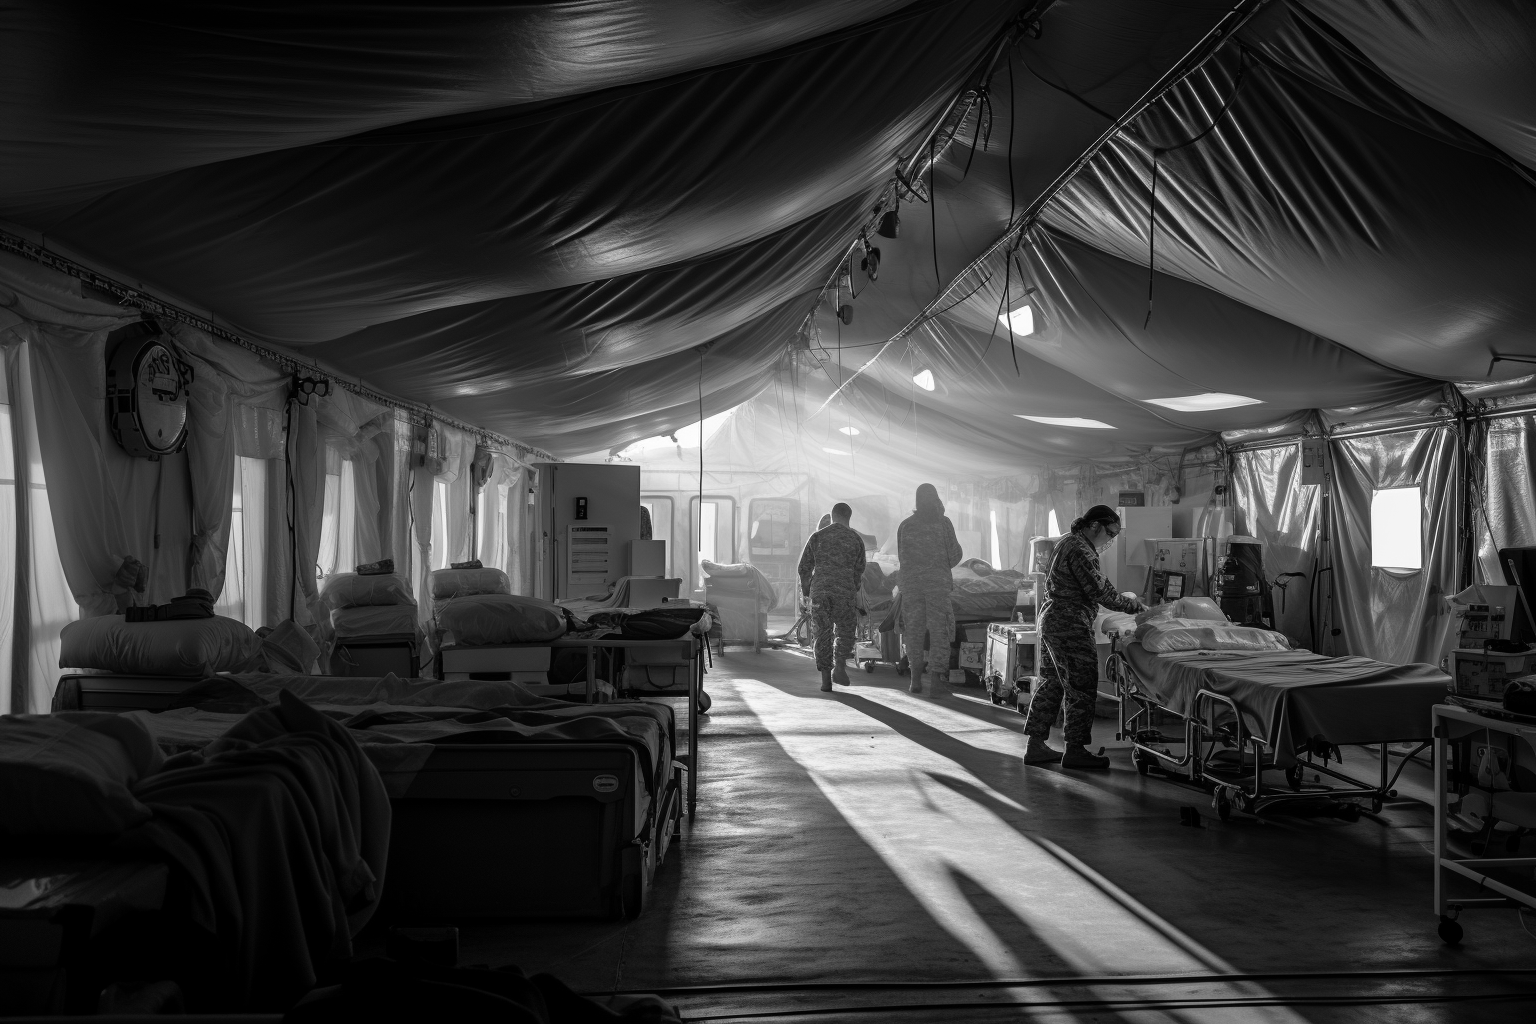 Inside a military field hospital with personnel and beds in a tent.